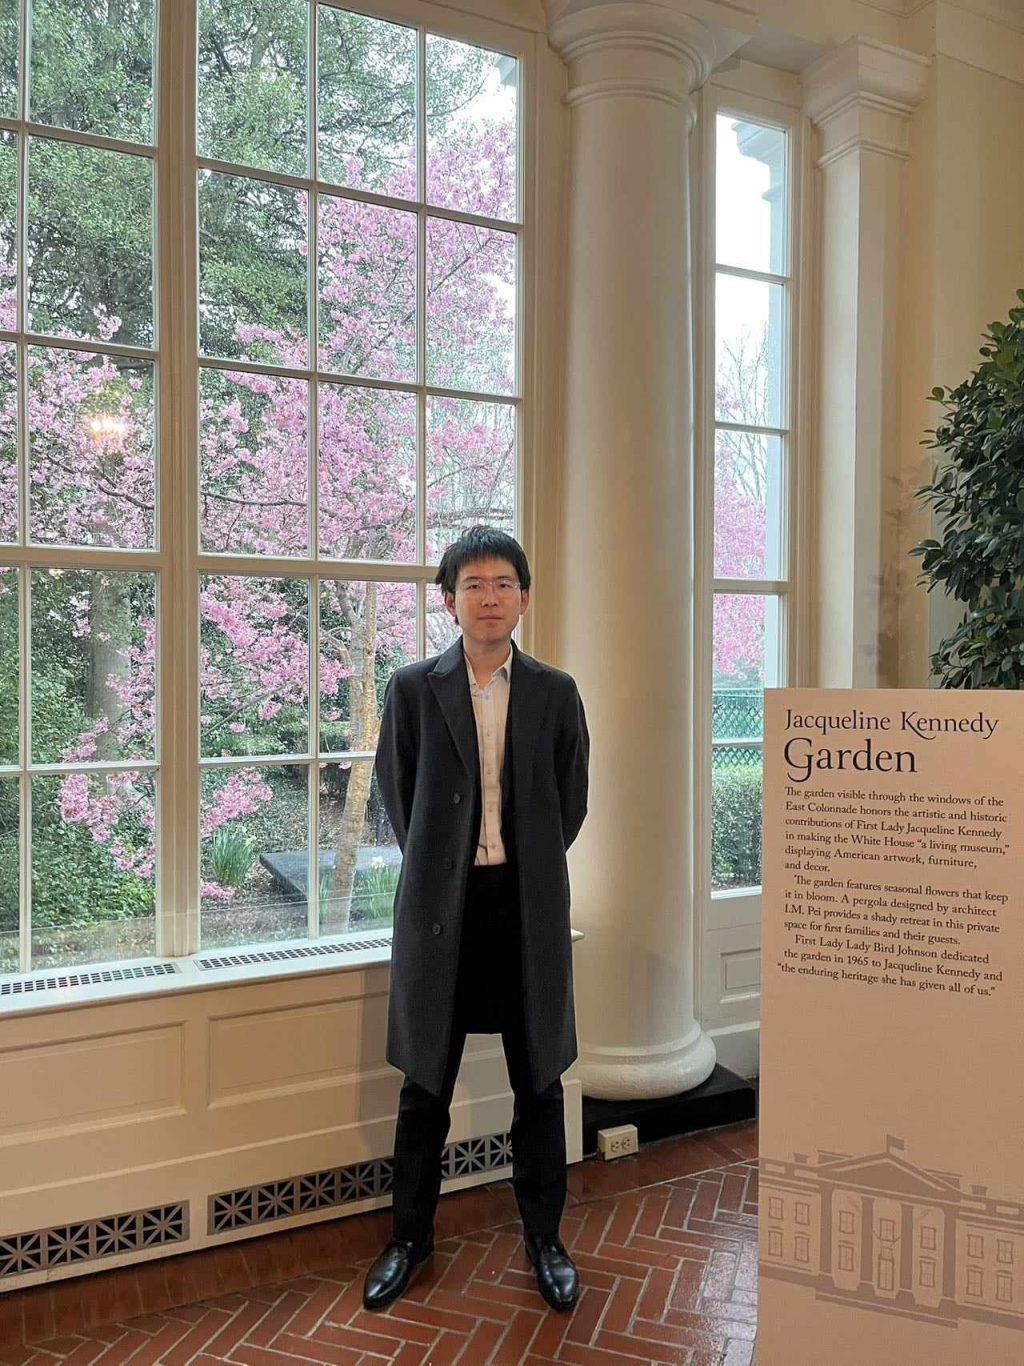 Junior Bill Qiu stands before the Jacqueline Kennedy Garden during the White House tour Feb. 27. With the National Cherry Blossom Festival happening later in March, cherry blossom flowers were already beginning to bloom in the city. Photo courtesy of Bill Qiu